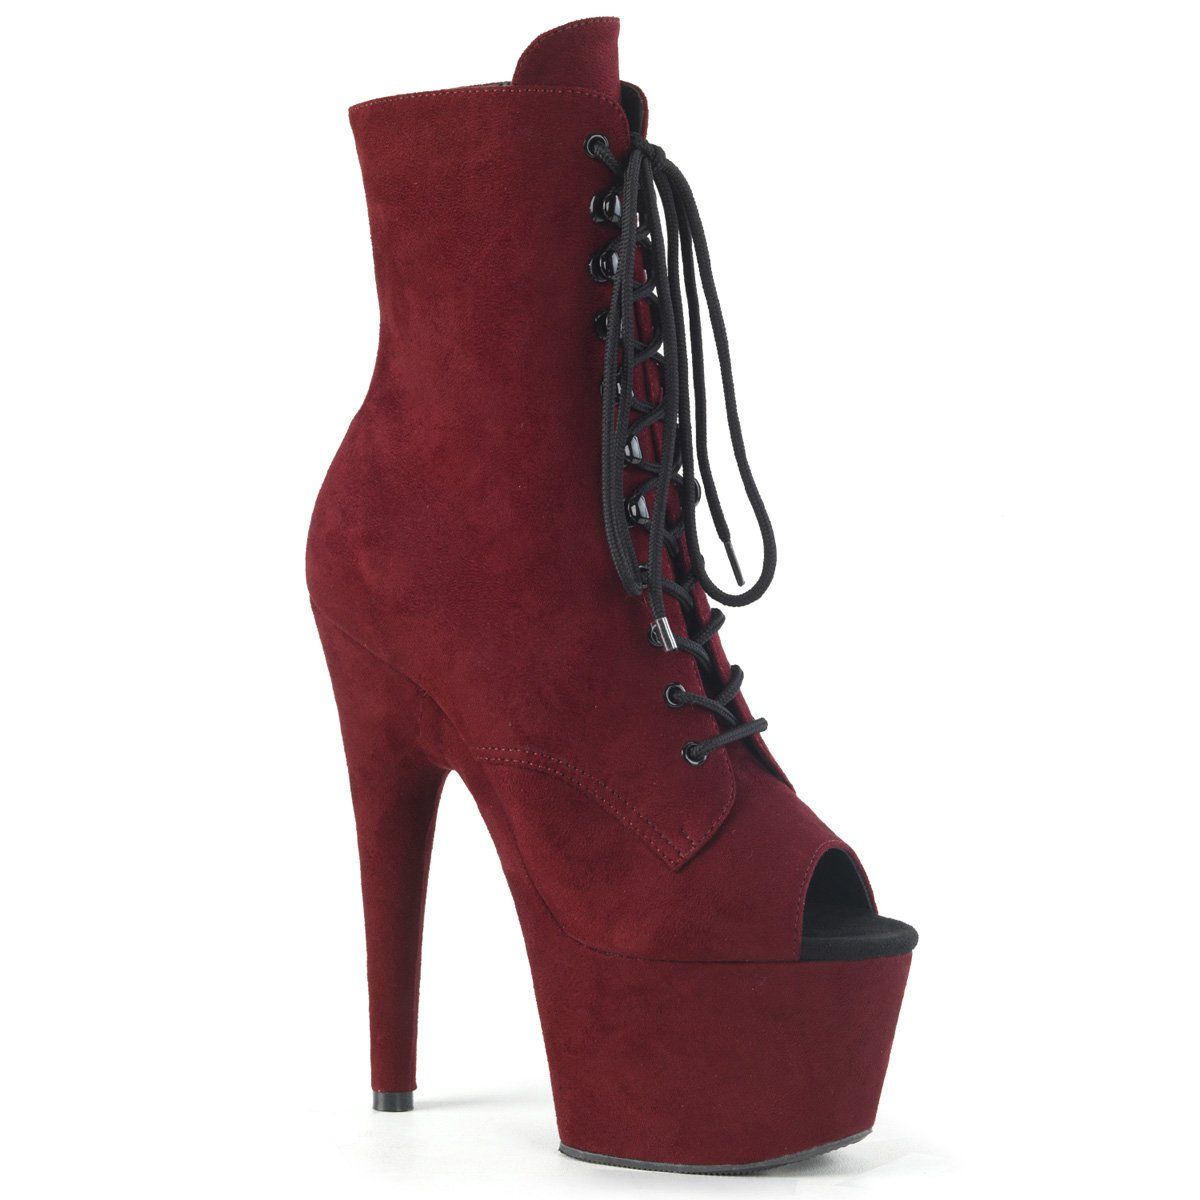 ADORE-1021FS Burgundy Faux Suede/Burgundy Faux Suede Ankle Boot Pleaser